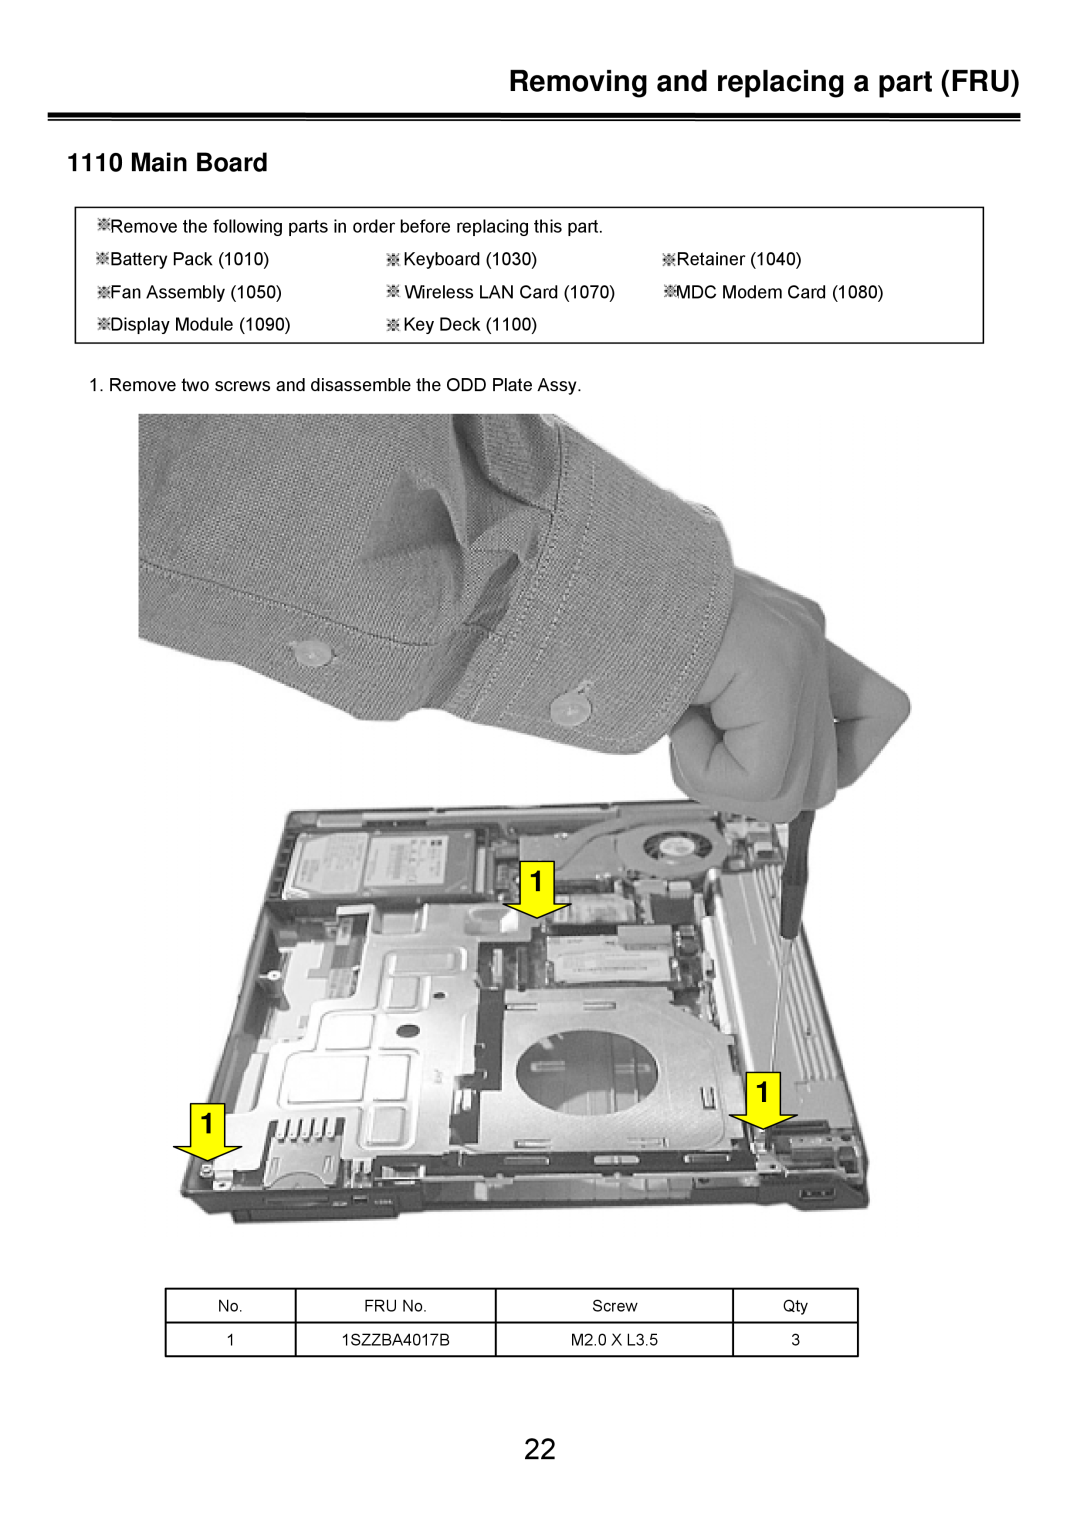 LG Electronics LS50 service manual Main Board, Removing and replacing a part FRU 